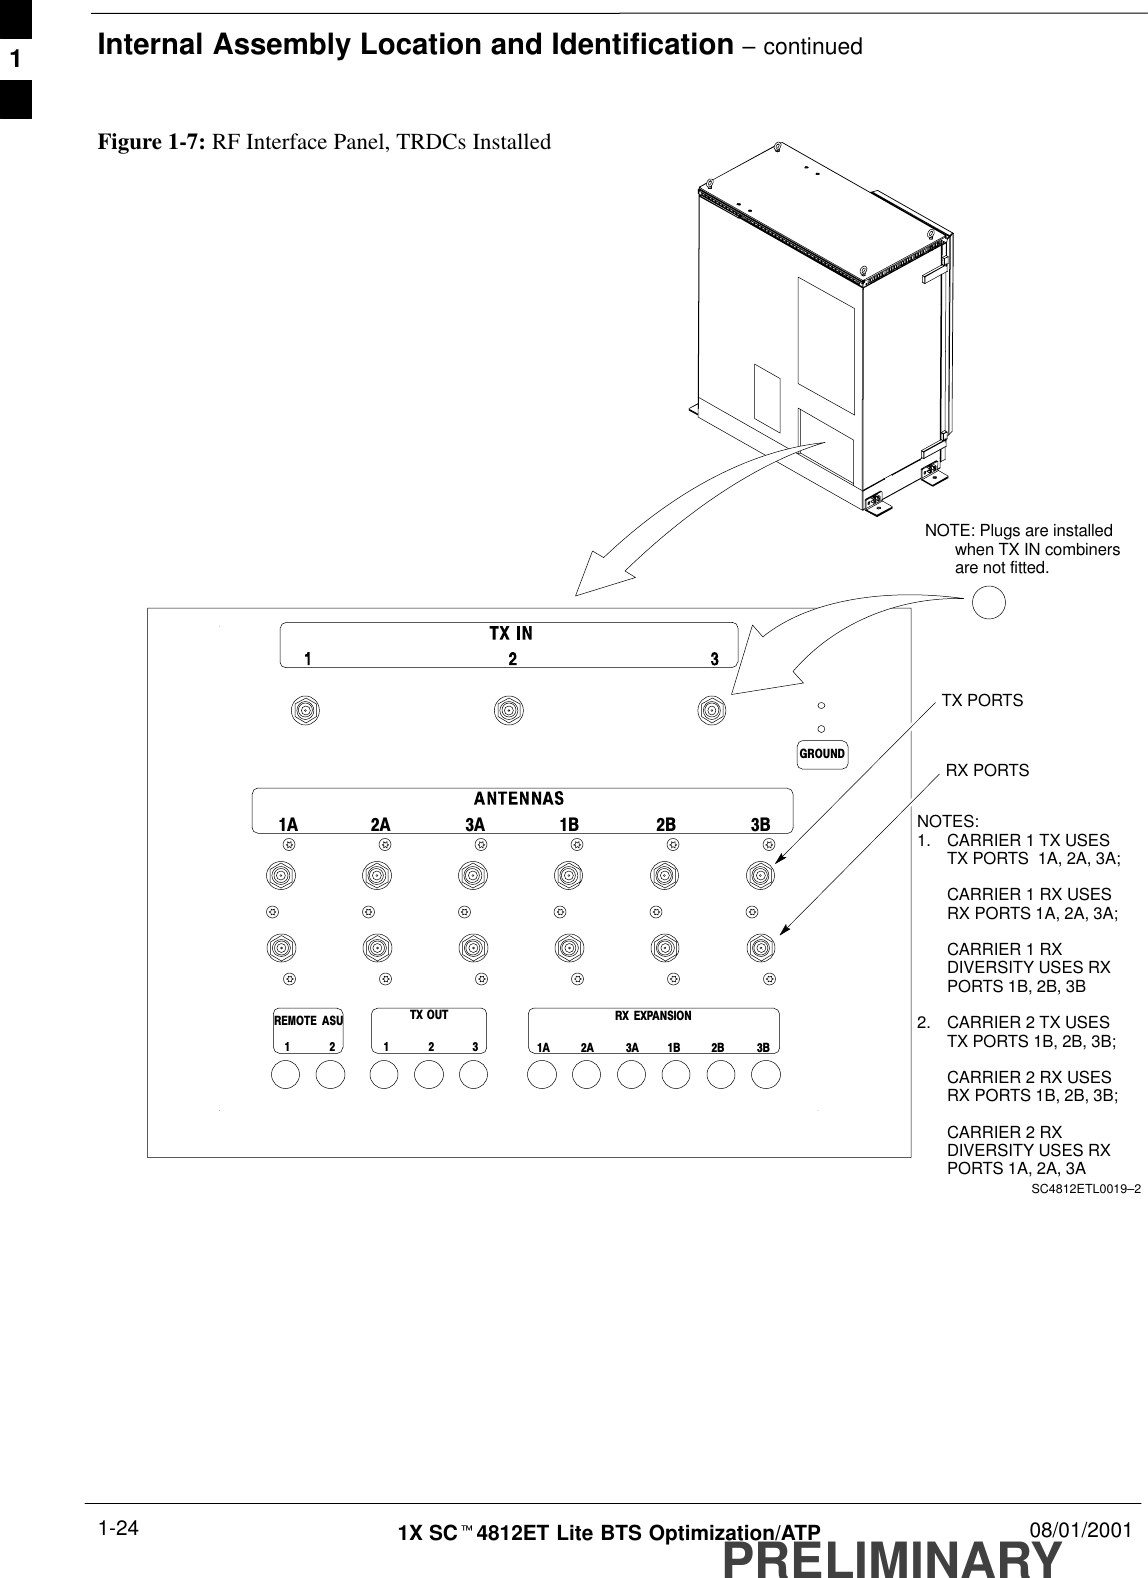 Internal Assembly Location and Identification – continuedPRELIMINARY1X SCt4812ET Lite BTS Optimization/ATP 08/01/20011-24Figure 1-7: RF Interface Panel, TRDCs InstalledGROUND1A 2A 3A 1B 2B 3BREMOTE   ASU1 2TX  OUT1 2 3 1A 2A 3A 1B 2B 3BRX  EXPANSIONRX PORTSTX PORTSNOTES:1. CARRIER 1 TX USESTX PORTS  1A, 2A, 3A;CARRIER 1 RX USESRX PORTS 1A, 2A, 3A;CARRIER 1 RXDIVERSITY USES RXPORTS 1B, 2B, 3B2. CARRIER 2 TX USESTX PORTS 1B, 2B, 3B;CARRIER 2 RX USESRX PORTS 1B, 2B, 3B;CARRIER 2 RXDIVERSITY USES RXPORTS 1A, 2A, 3ASC4812ETL0019–2NOTE: Plugs are installedwhen TX IN combinersare not fitted.1